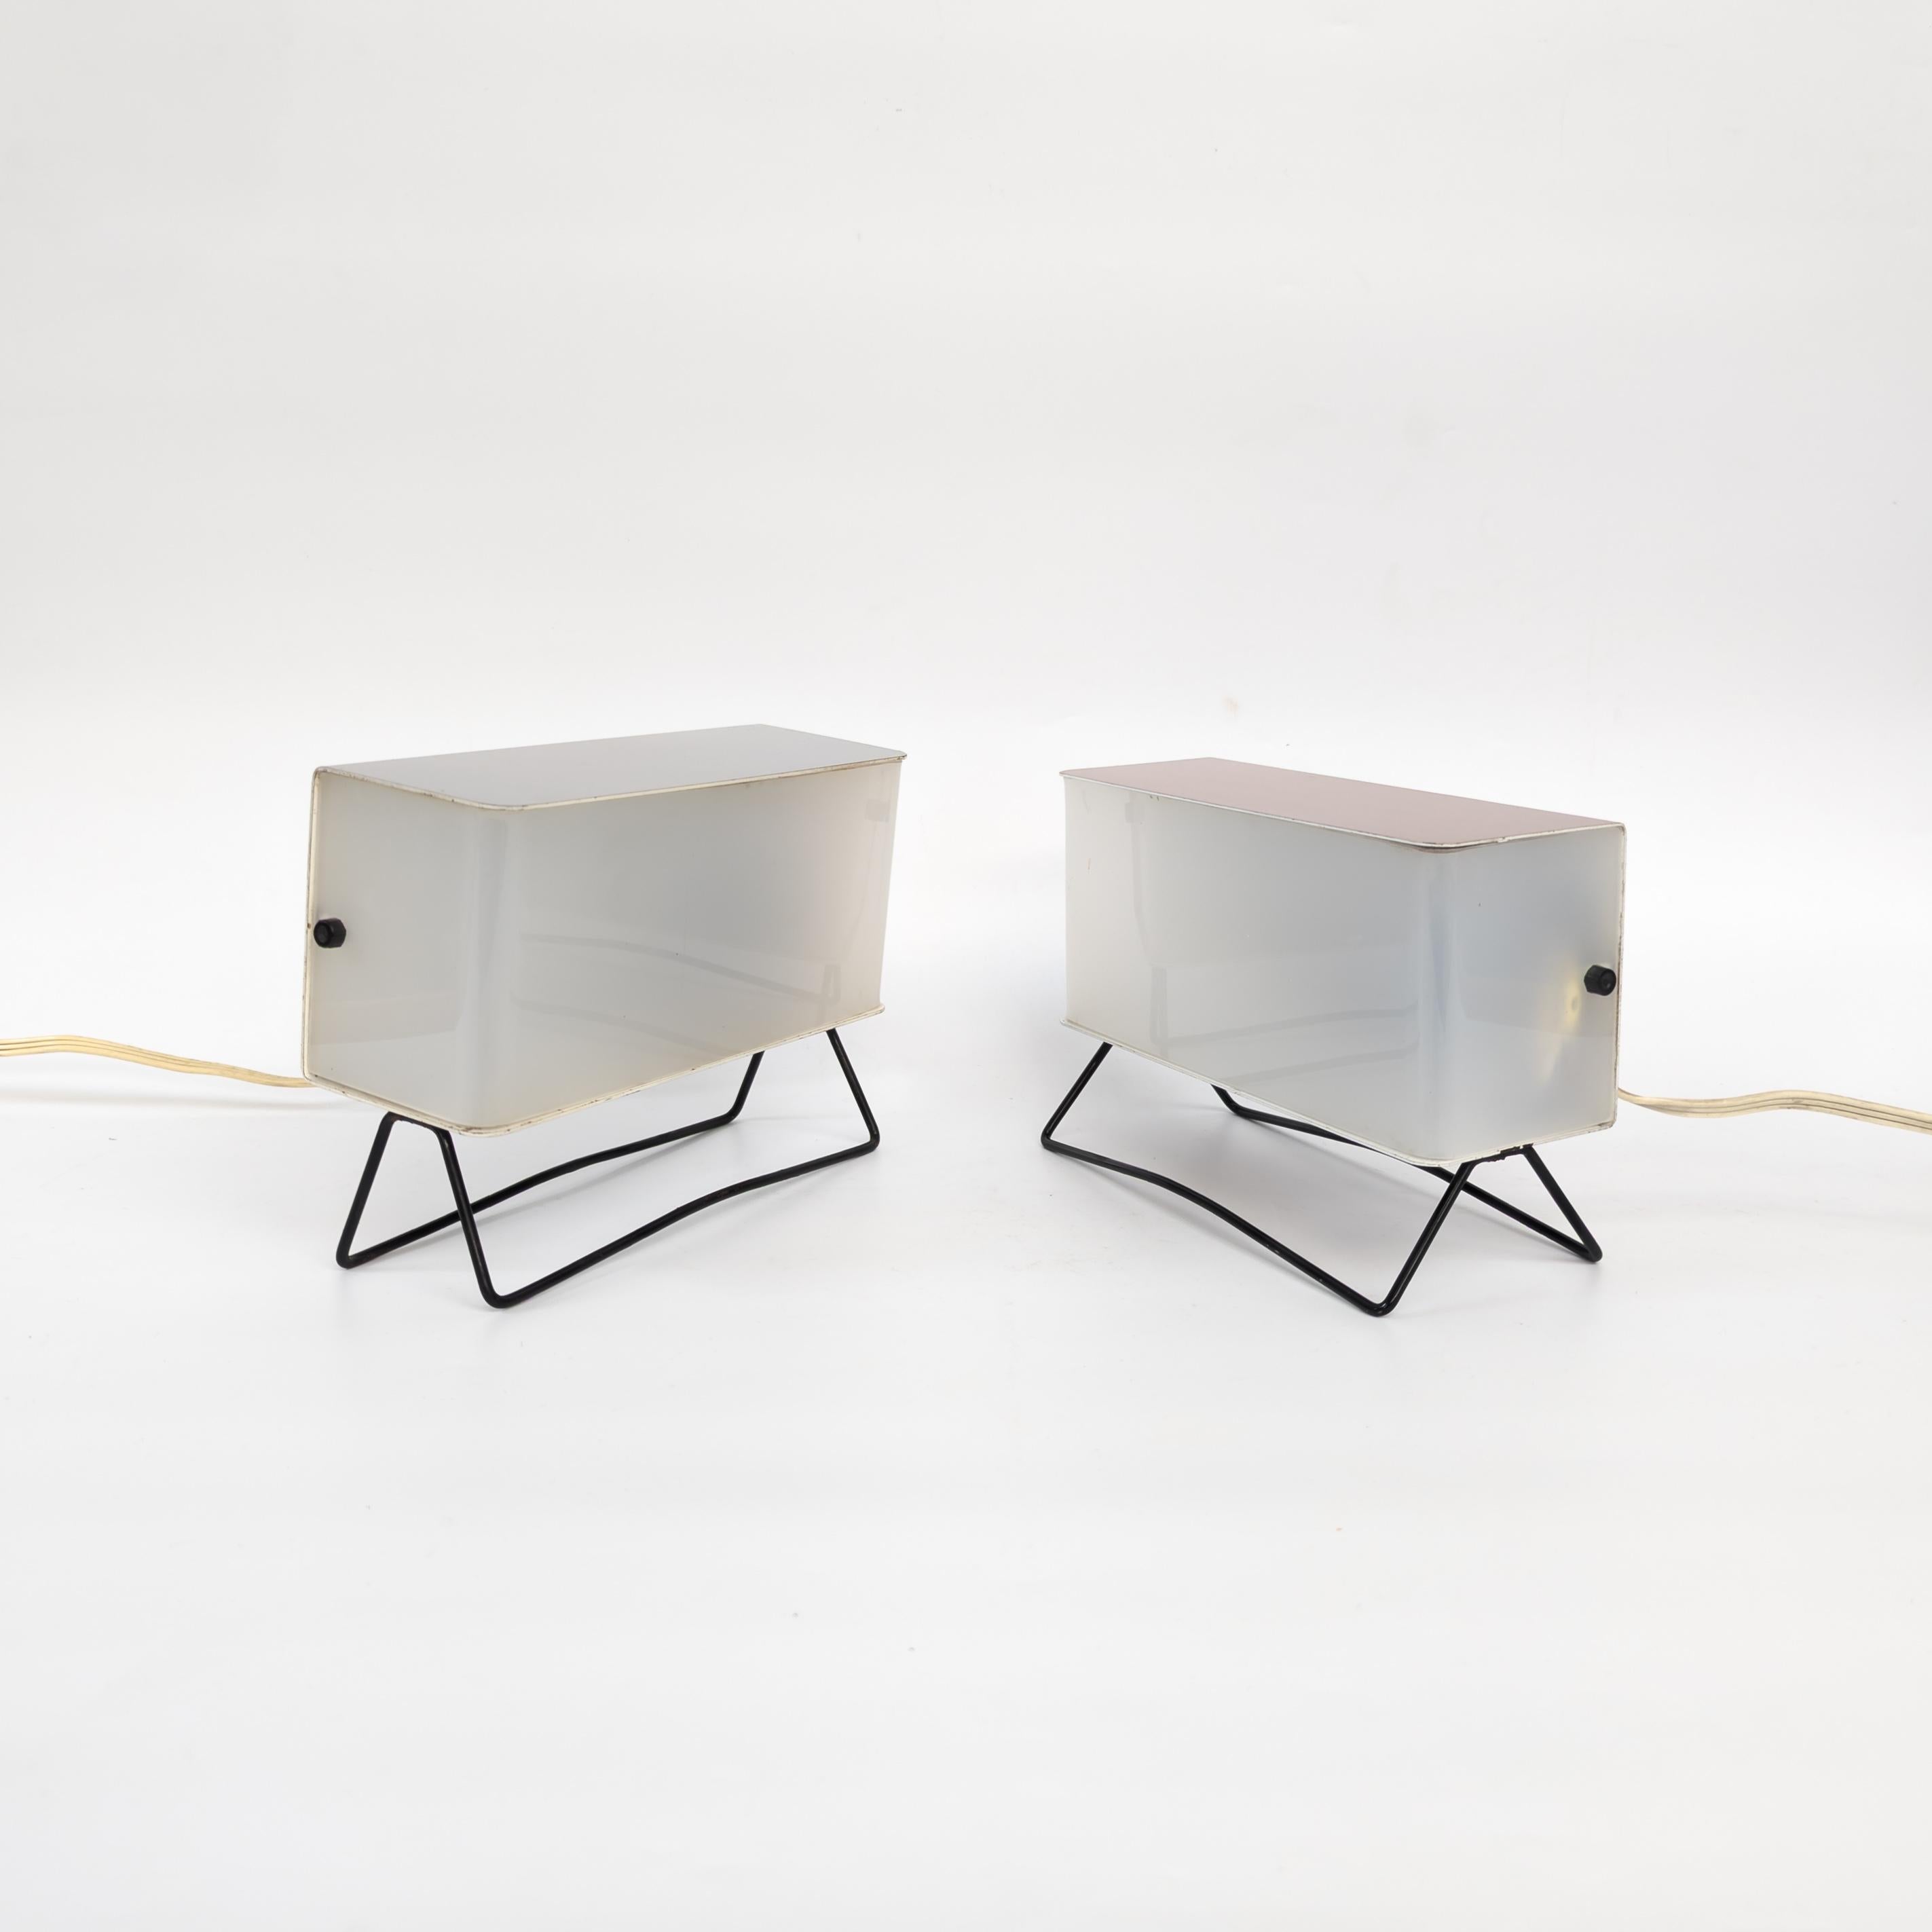 Slovak Pair of Mid Century table lamps by Pokrok Žilina, 1960s For Sale